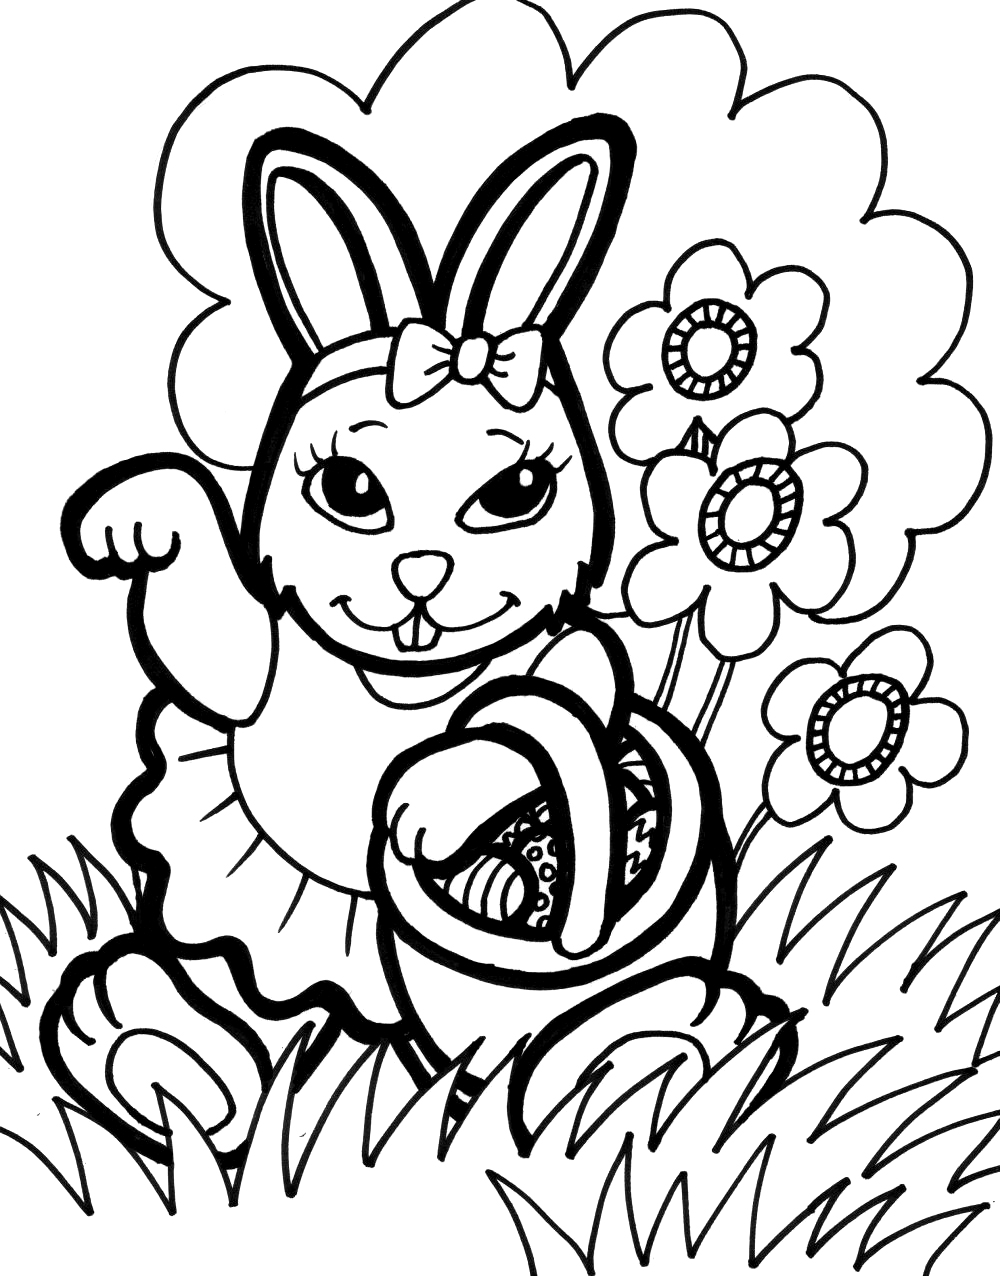 bunny coloring pictures bunny coloring pages best coloring pages for kids bunny coloring pictures 1 1